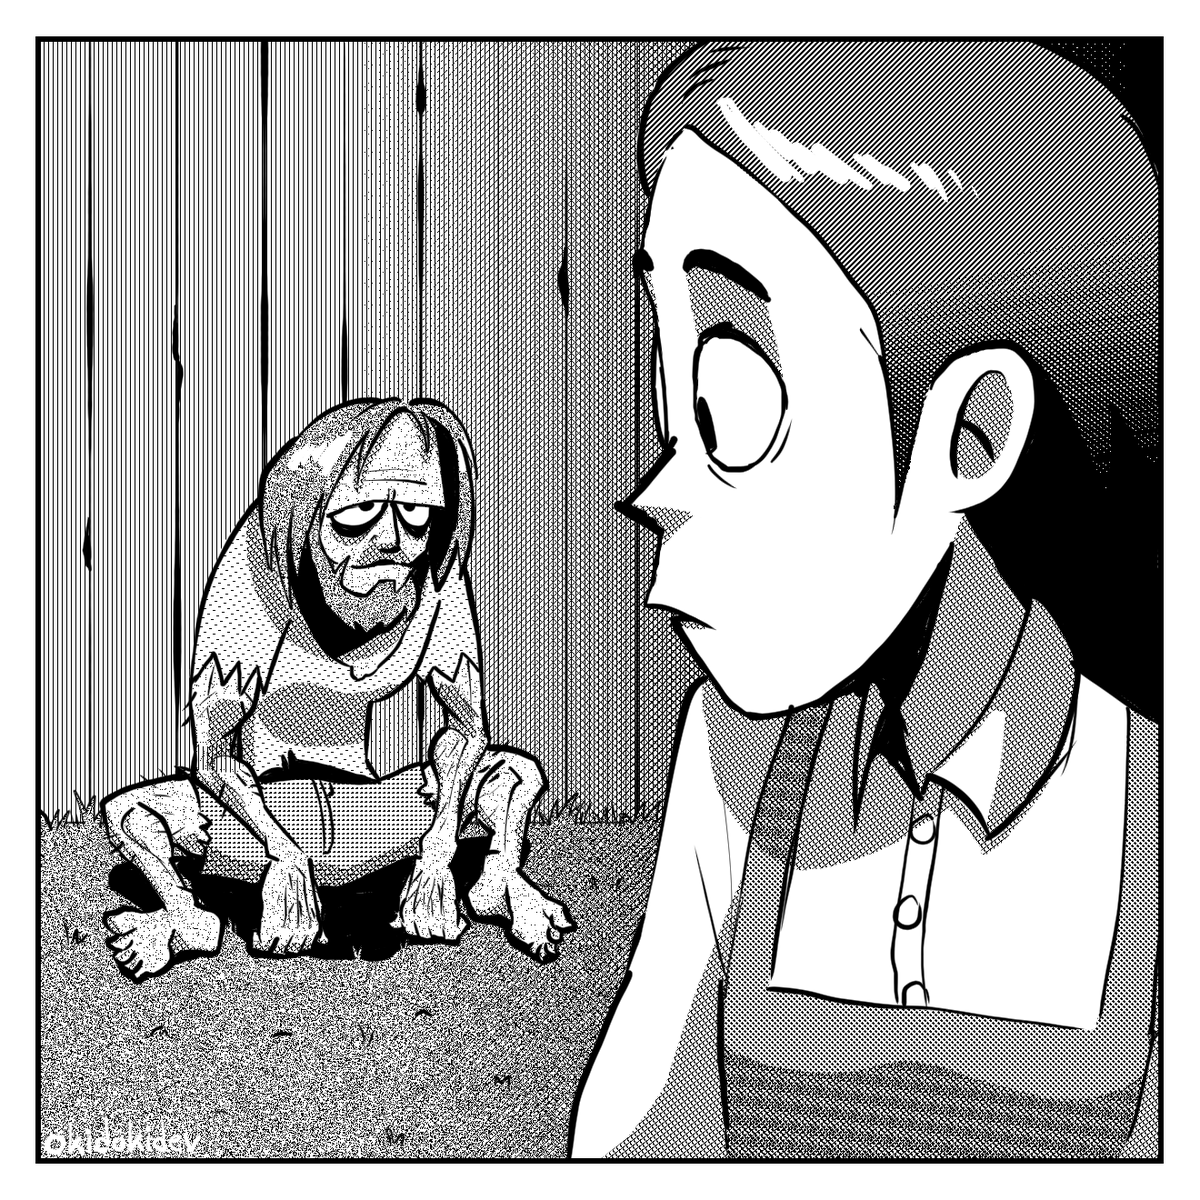 I've been itching to draw some Clock Tower art because there are quite a few scenes that have been firmly nestled in my mind... I also wanted to practice composition and using screentones! I also included a version with speech bubbles to drive home the comic look. 